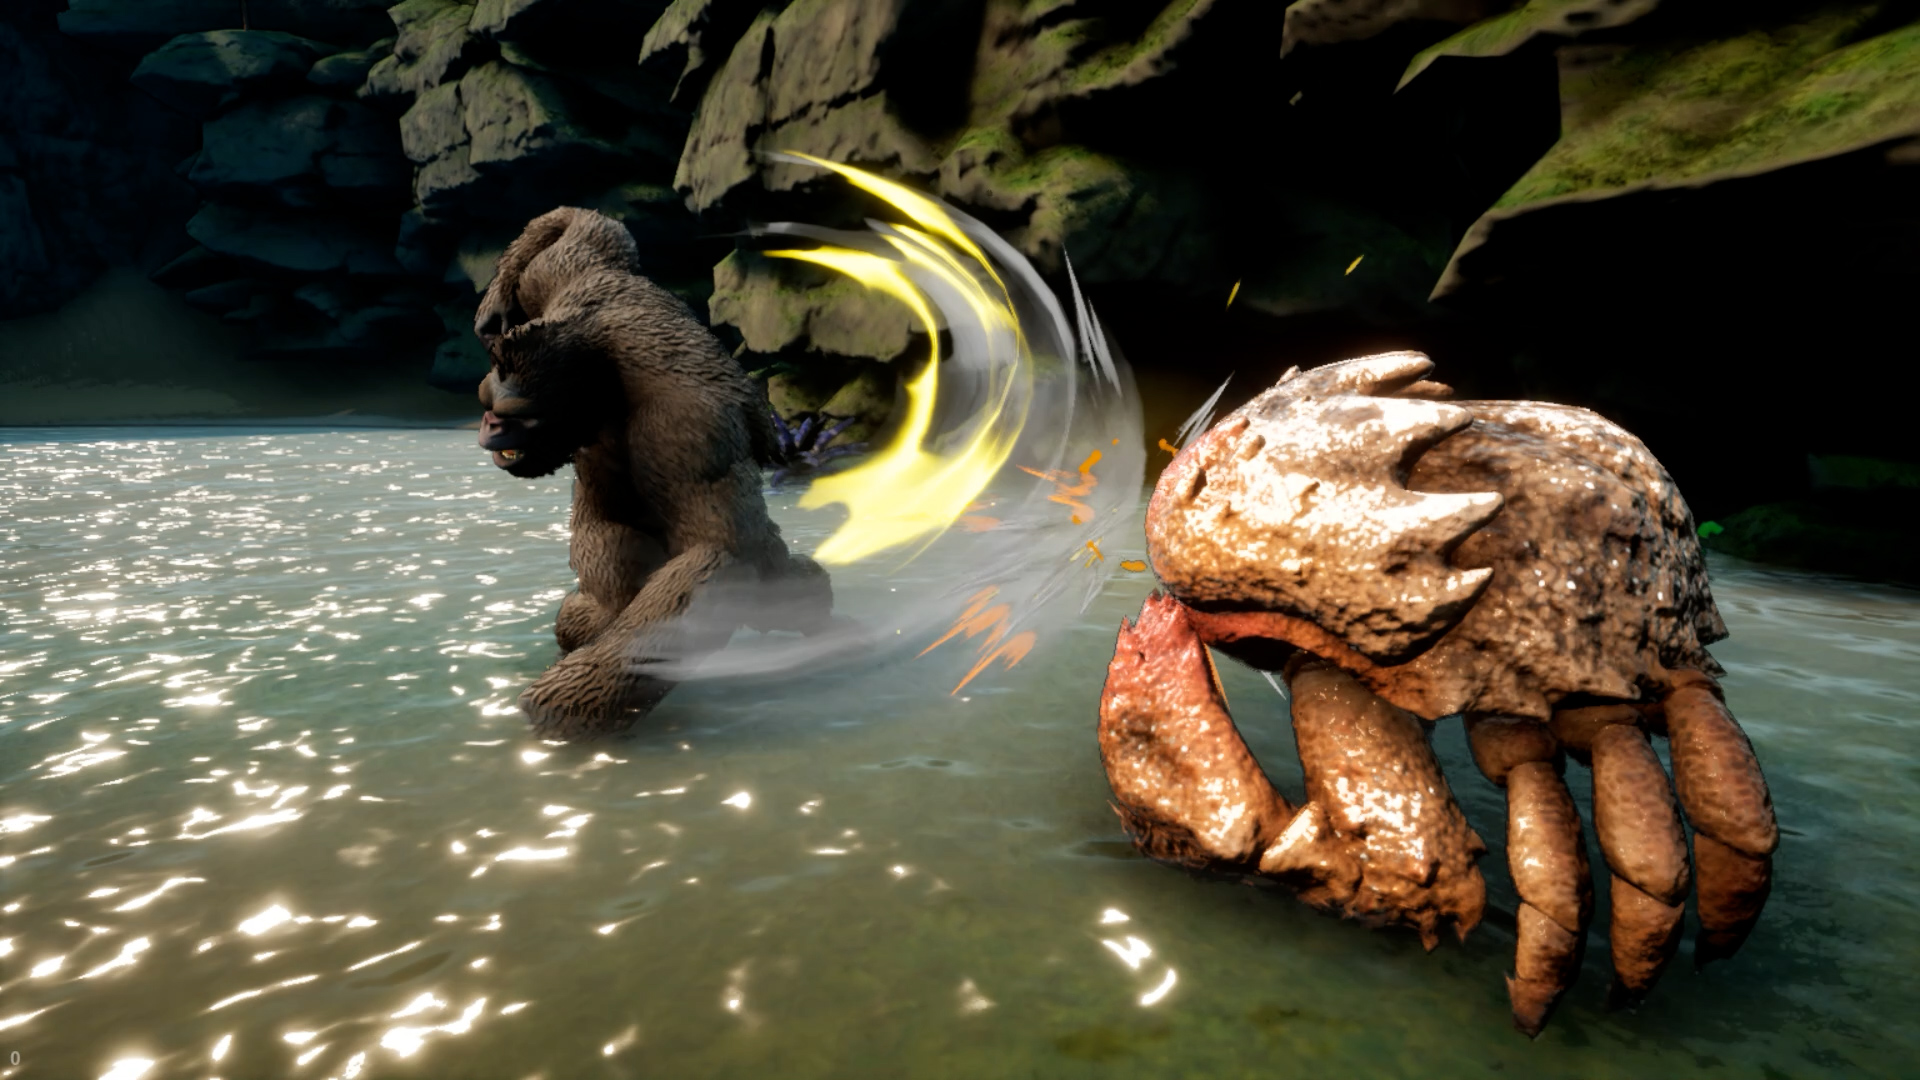 Ark: Survival Evolved arrives on Xbox One early access next week - Polygon